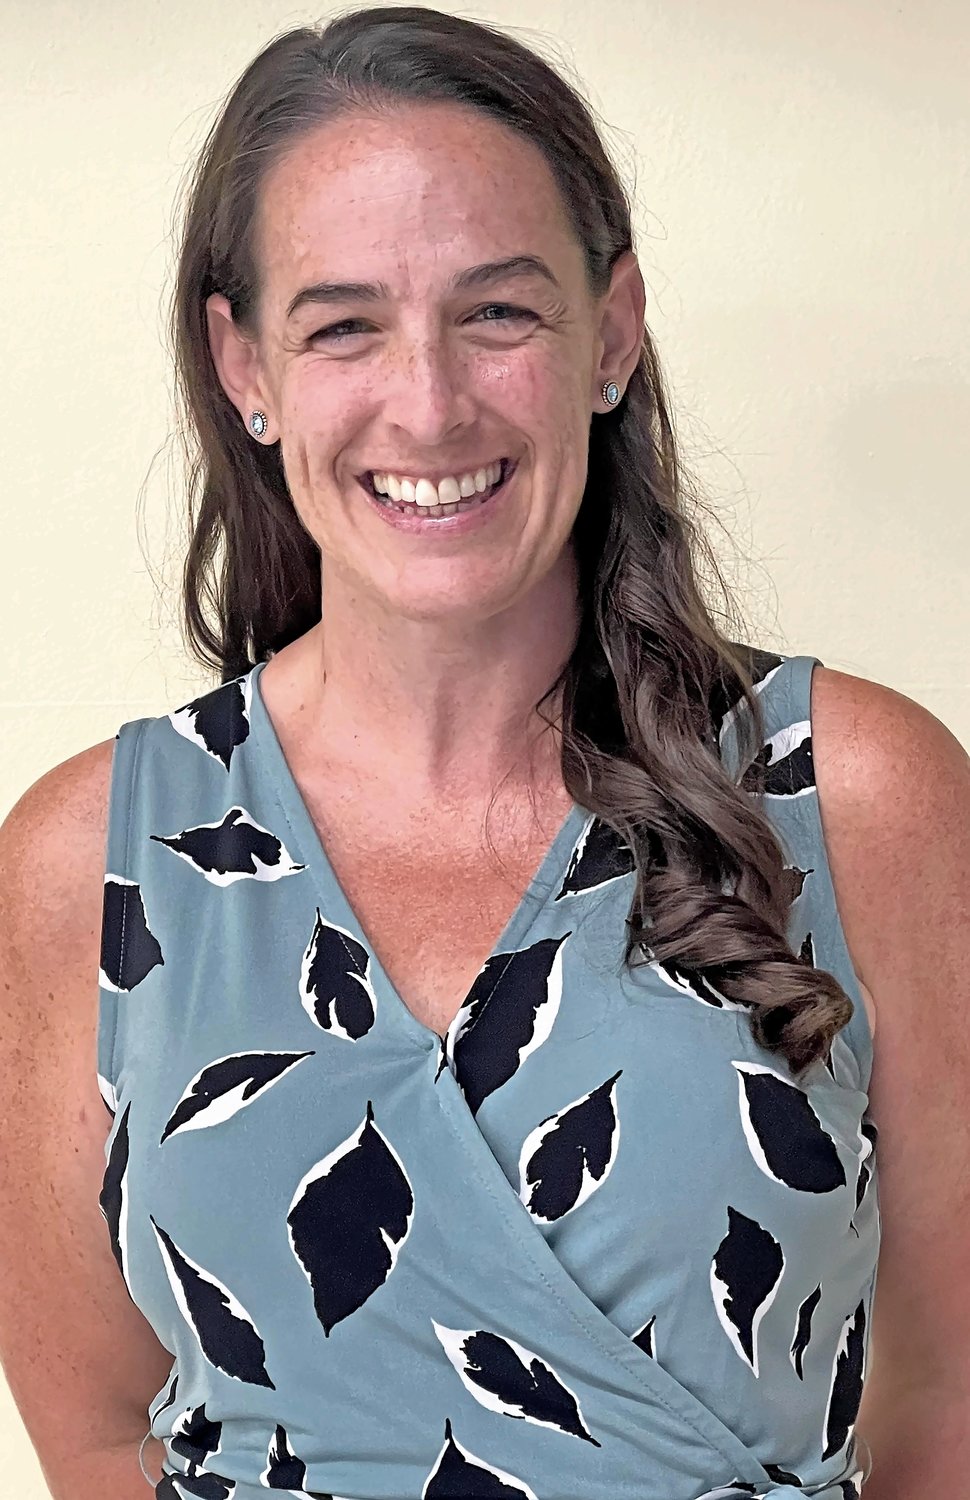 Lawrence Elementary School has a new principal as Jacqueline Beckmann, above, succeeds Rina Beach who retired at the end of this past school year.